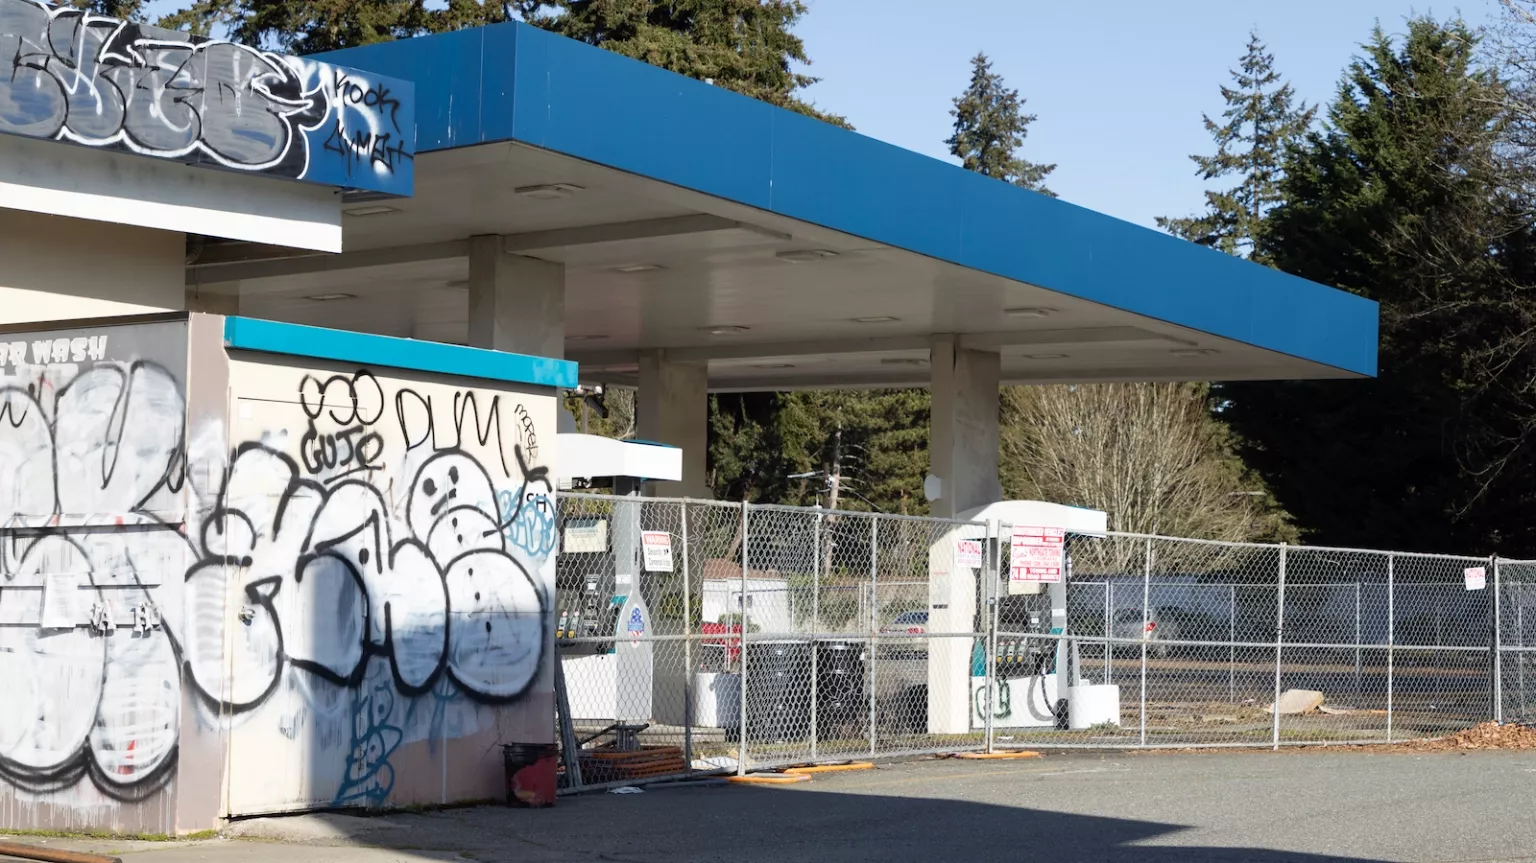 A gas station is surrounded by wire fencing and has graffiti on its walls.